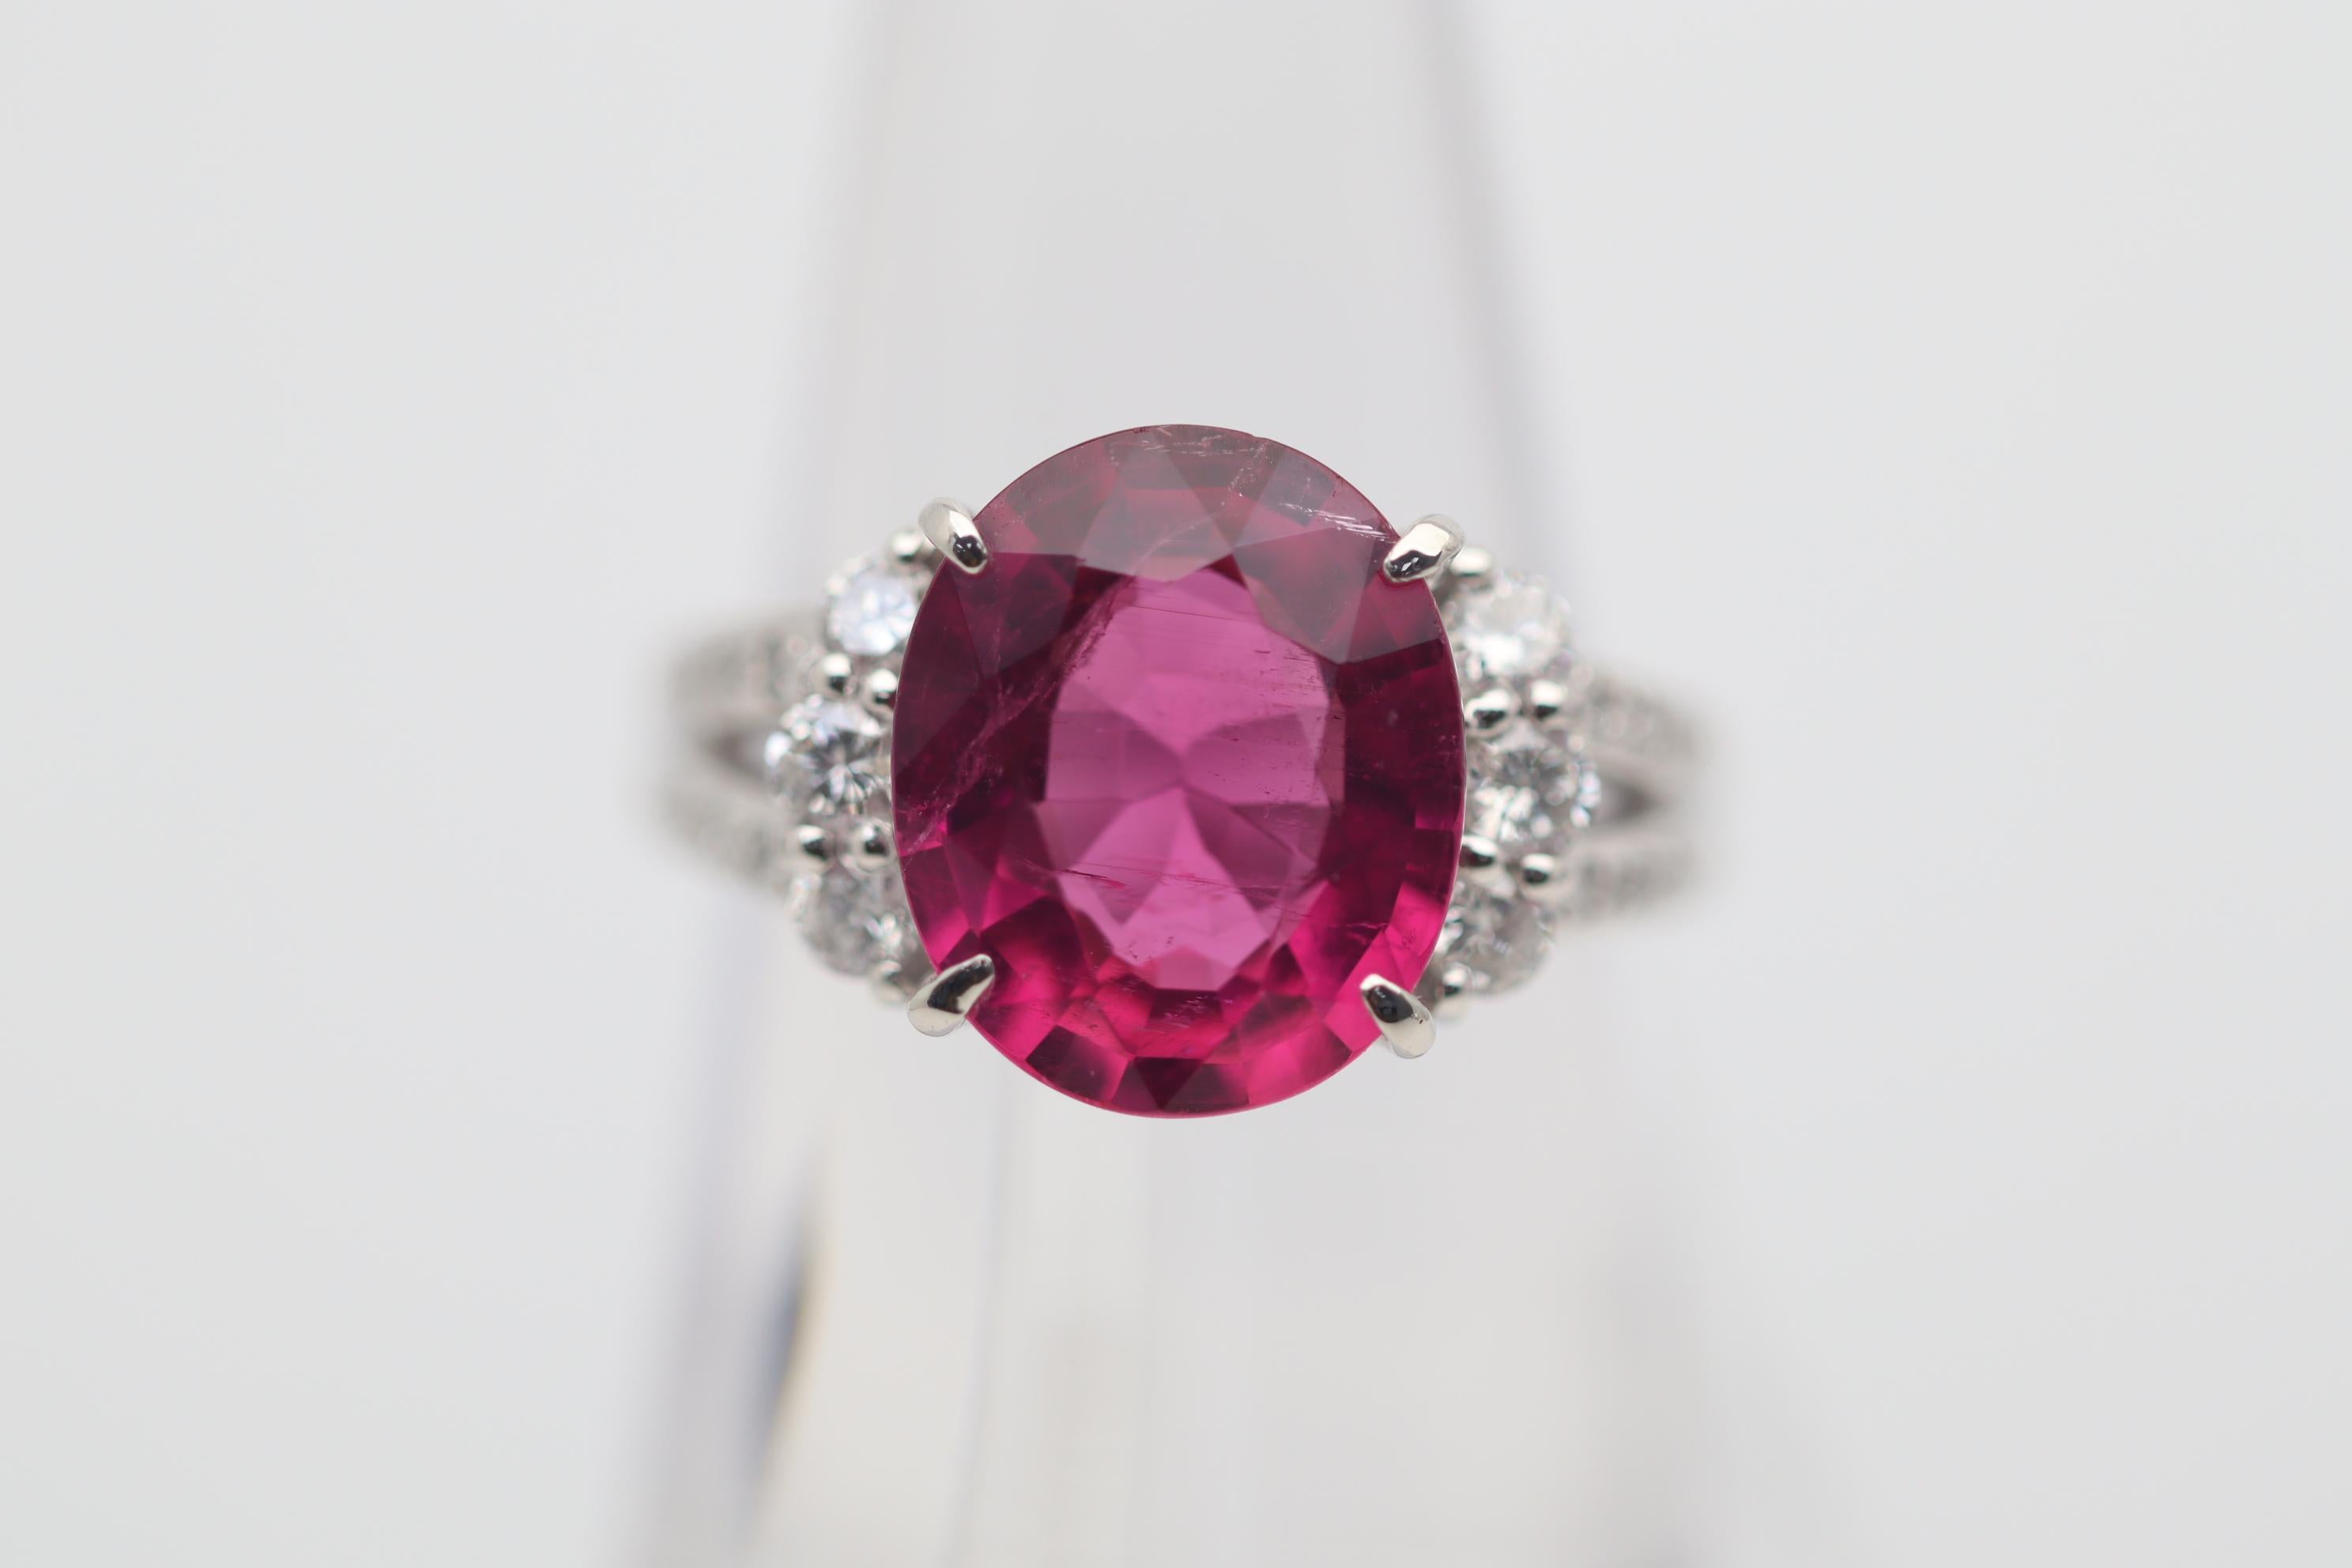 A superb top gem-quality rubellite tourmaline takes center stage. It weighs 4.85 carats and has a bright electric vivid pink-red color. The brilliance and light return of the tourmaline is very impressive which is due to the stone’s natural clarity